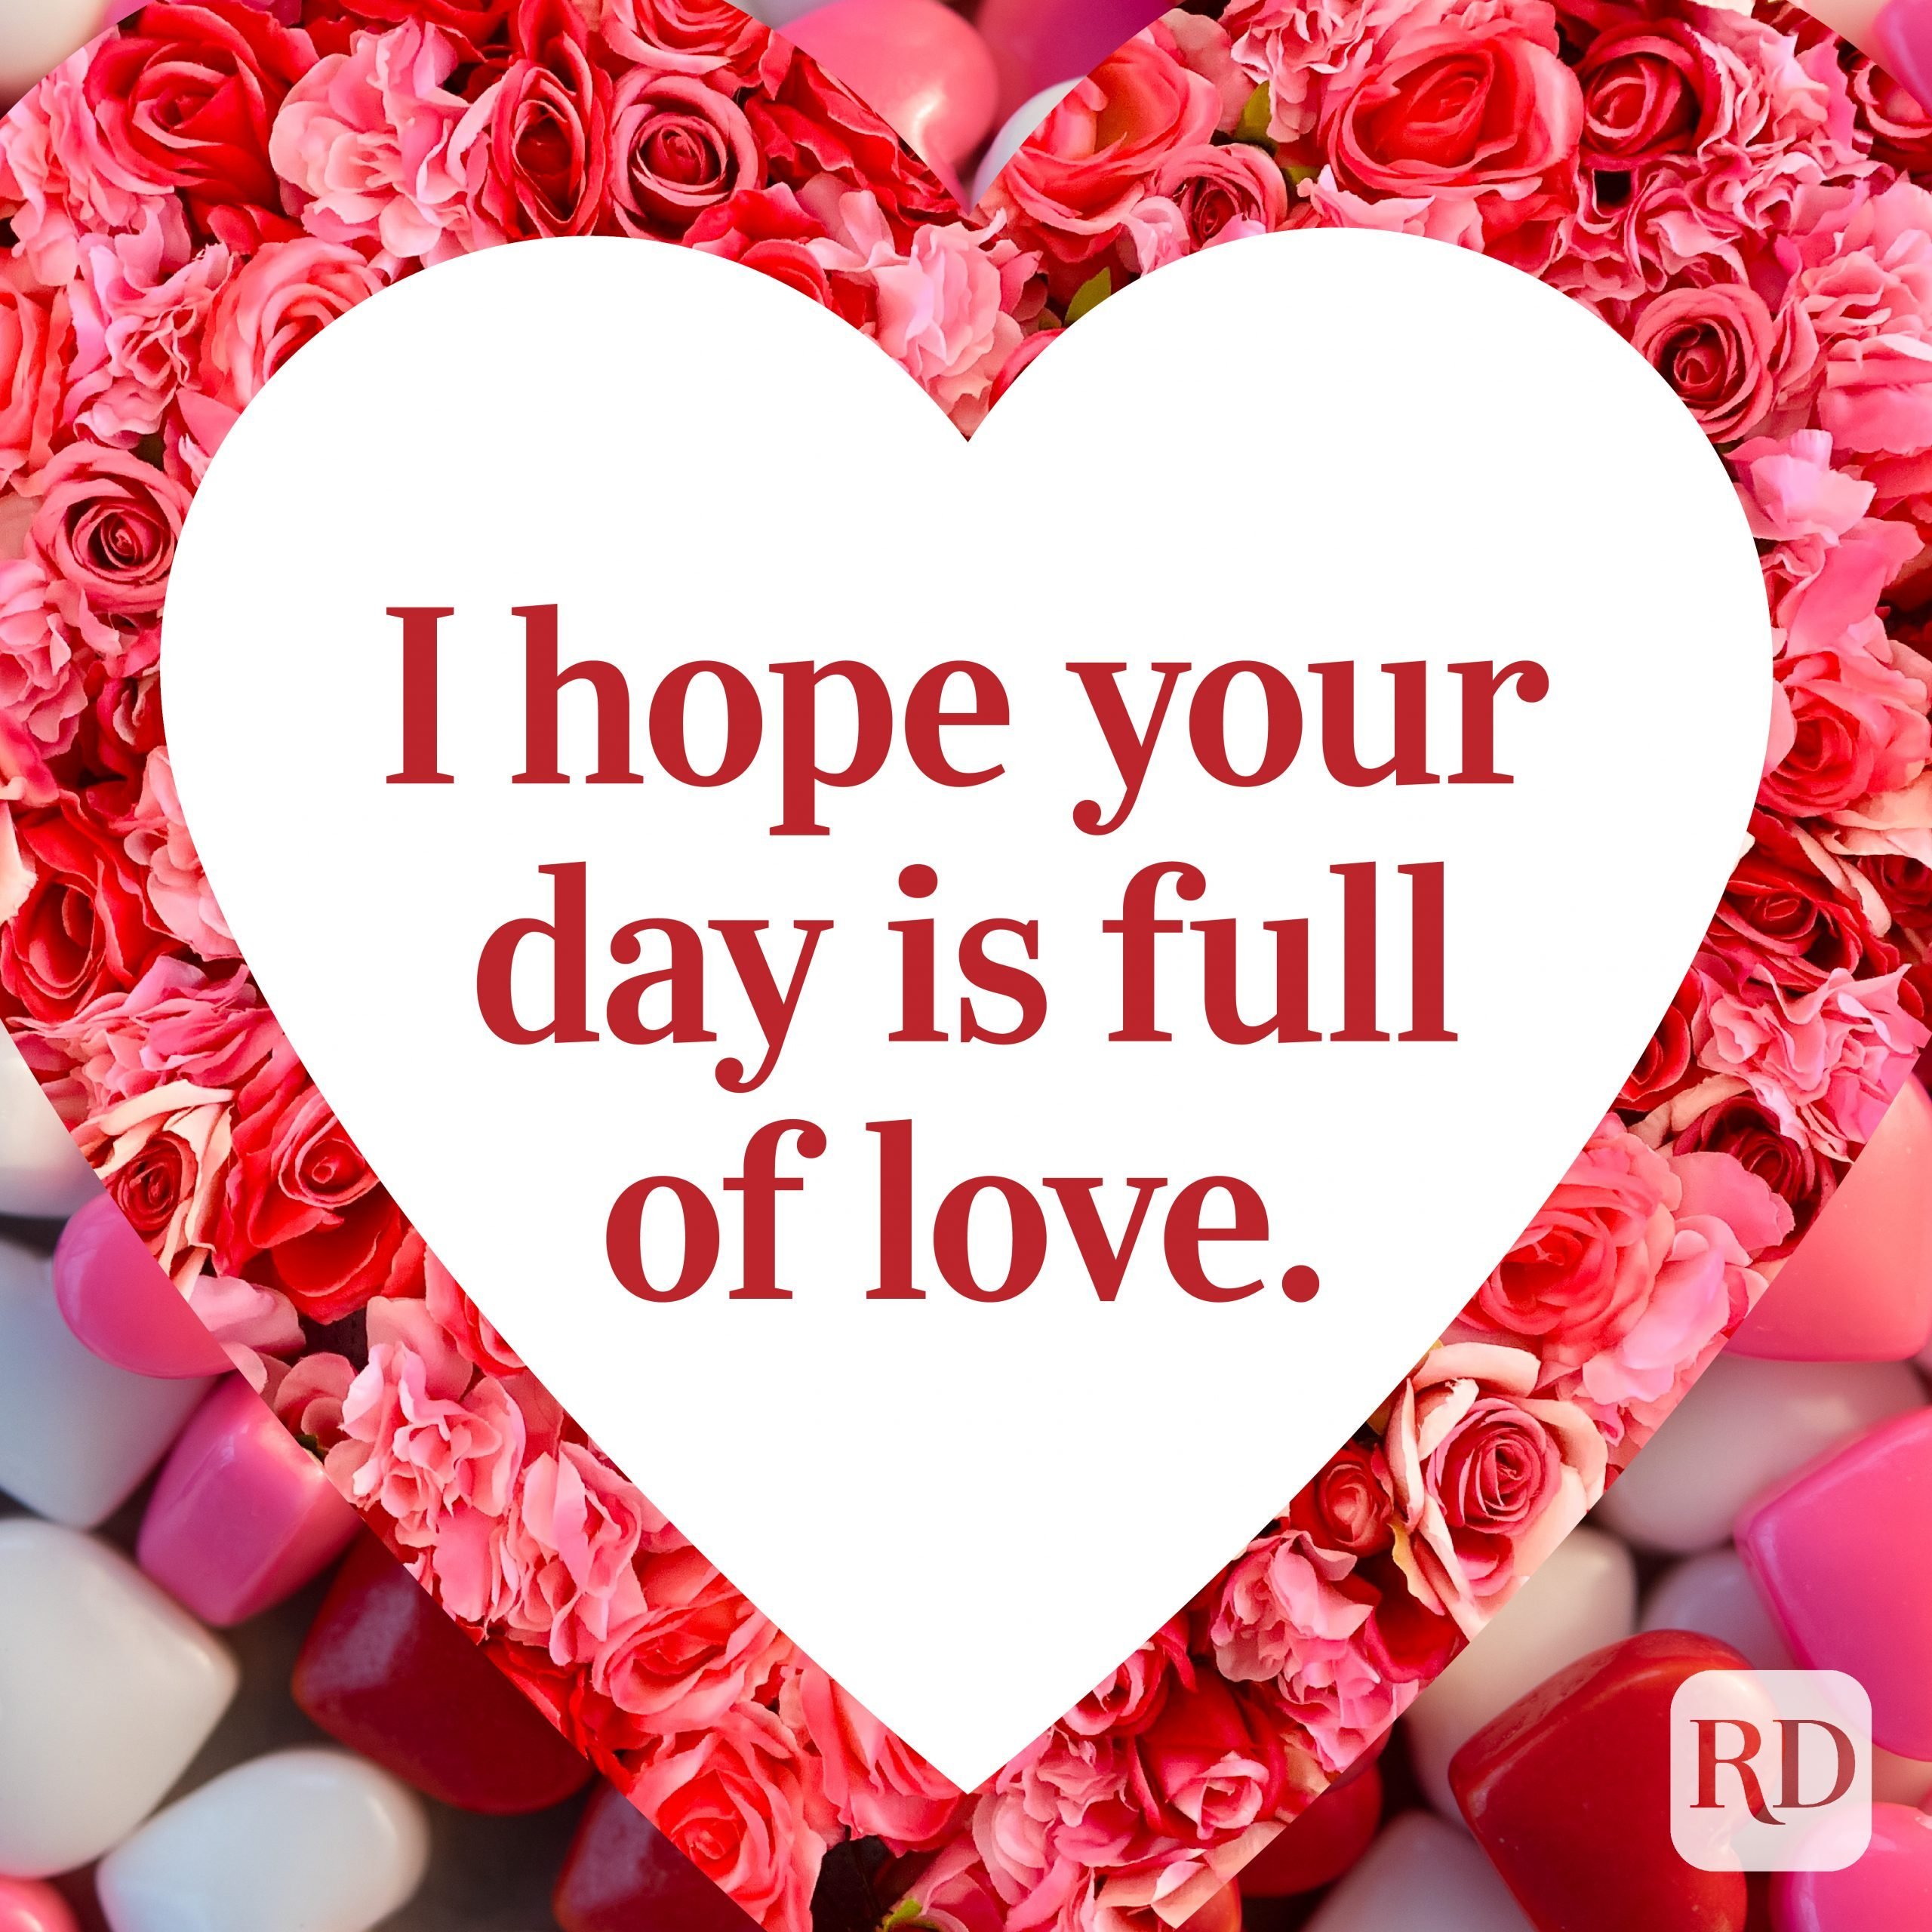 Happy Tuesday my love! 100+ best message, wishes, SMS ideas 